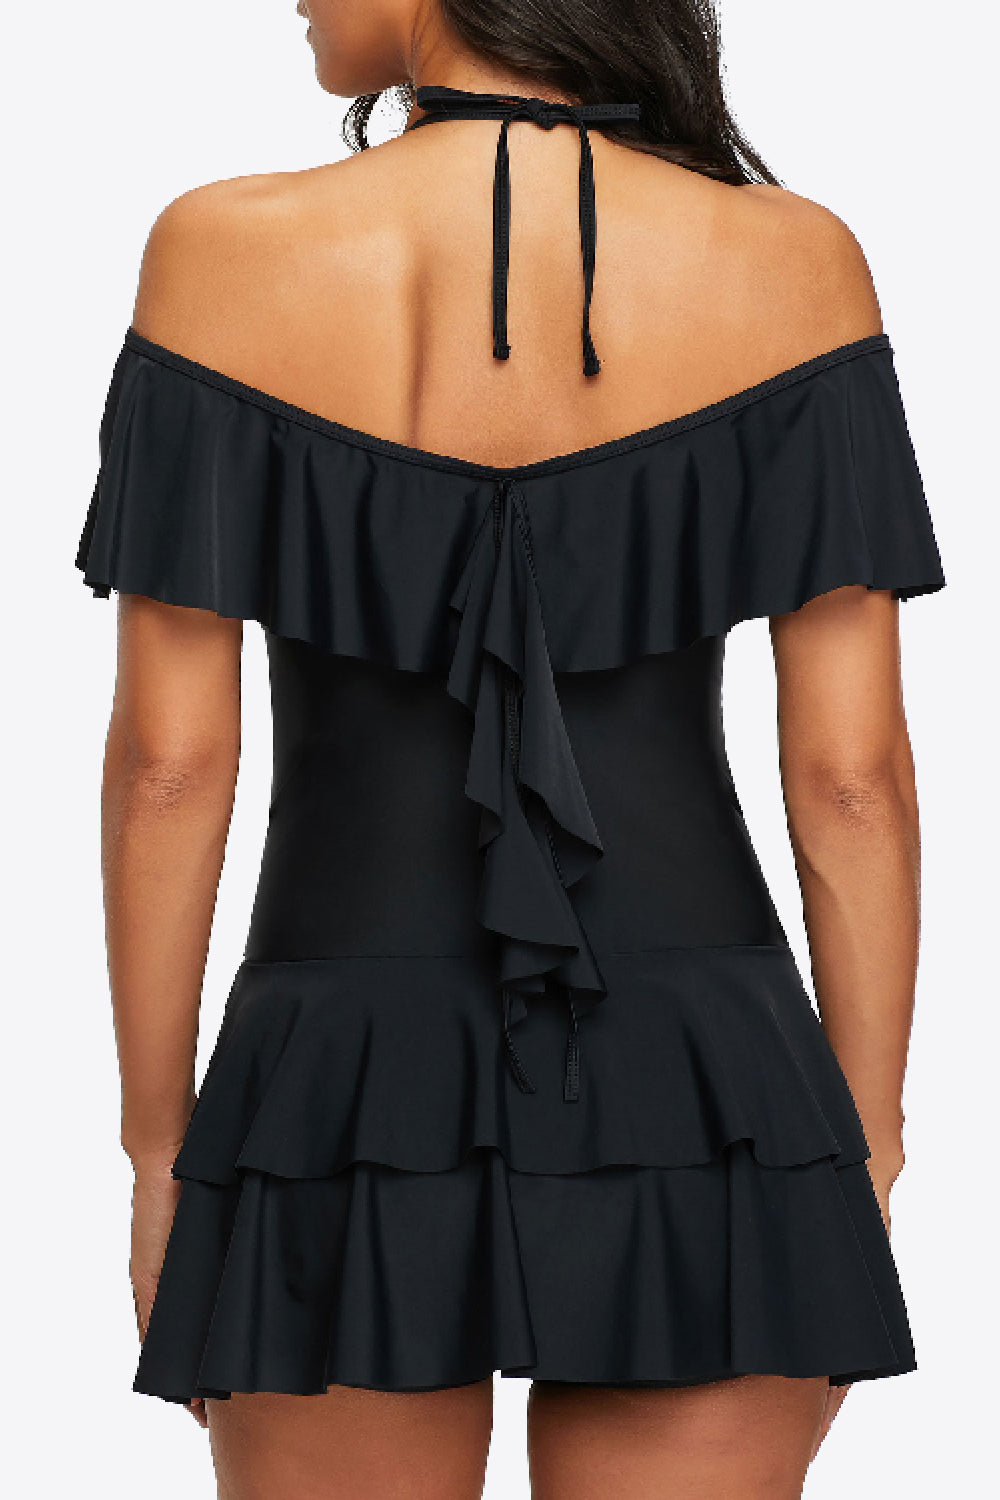 Ruffled Cold-Shoulder Two-Piece Swimsuit - The Fashion Unicorn